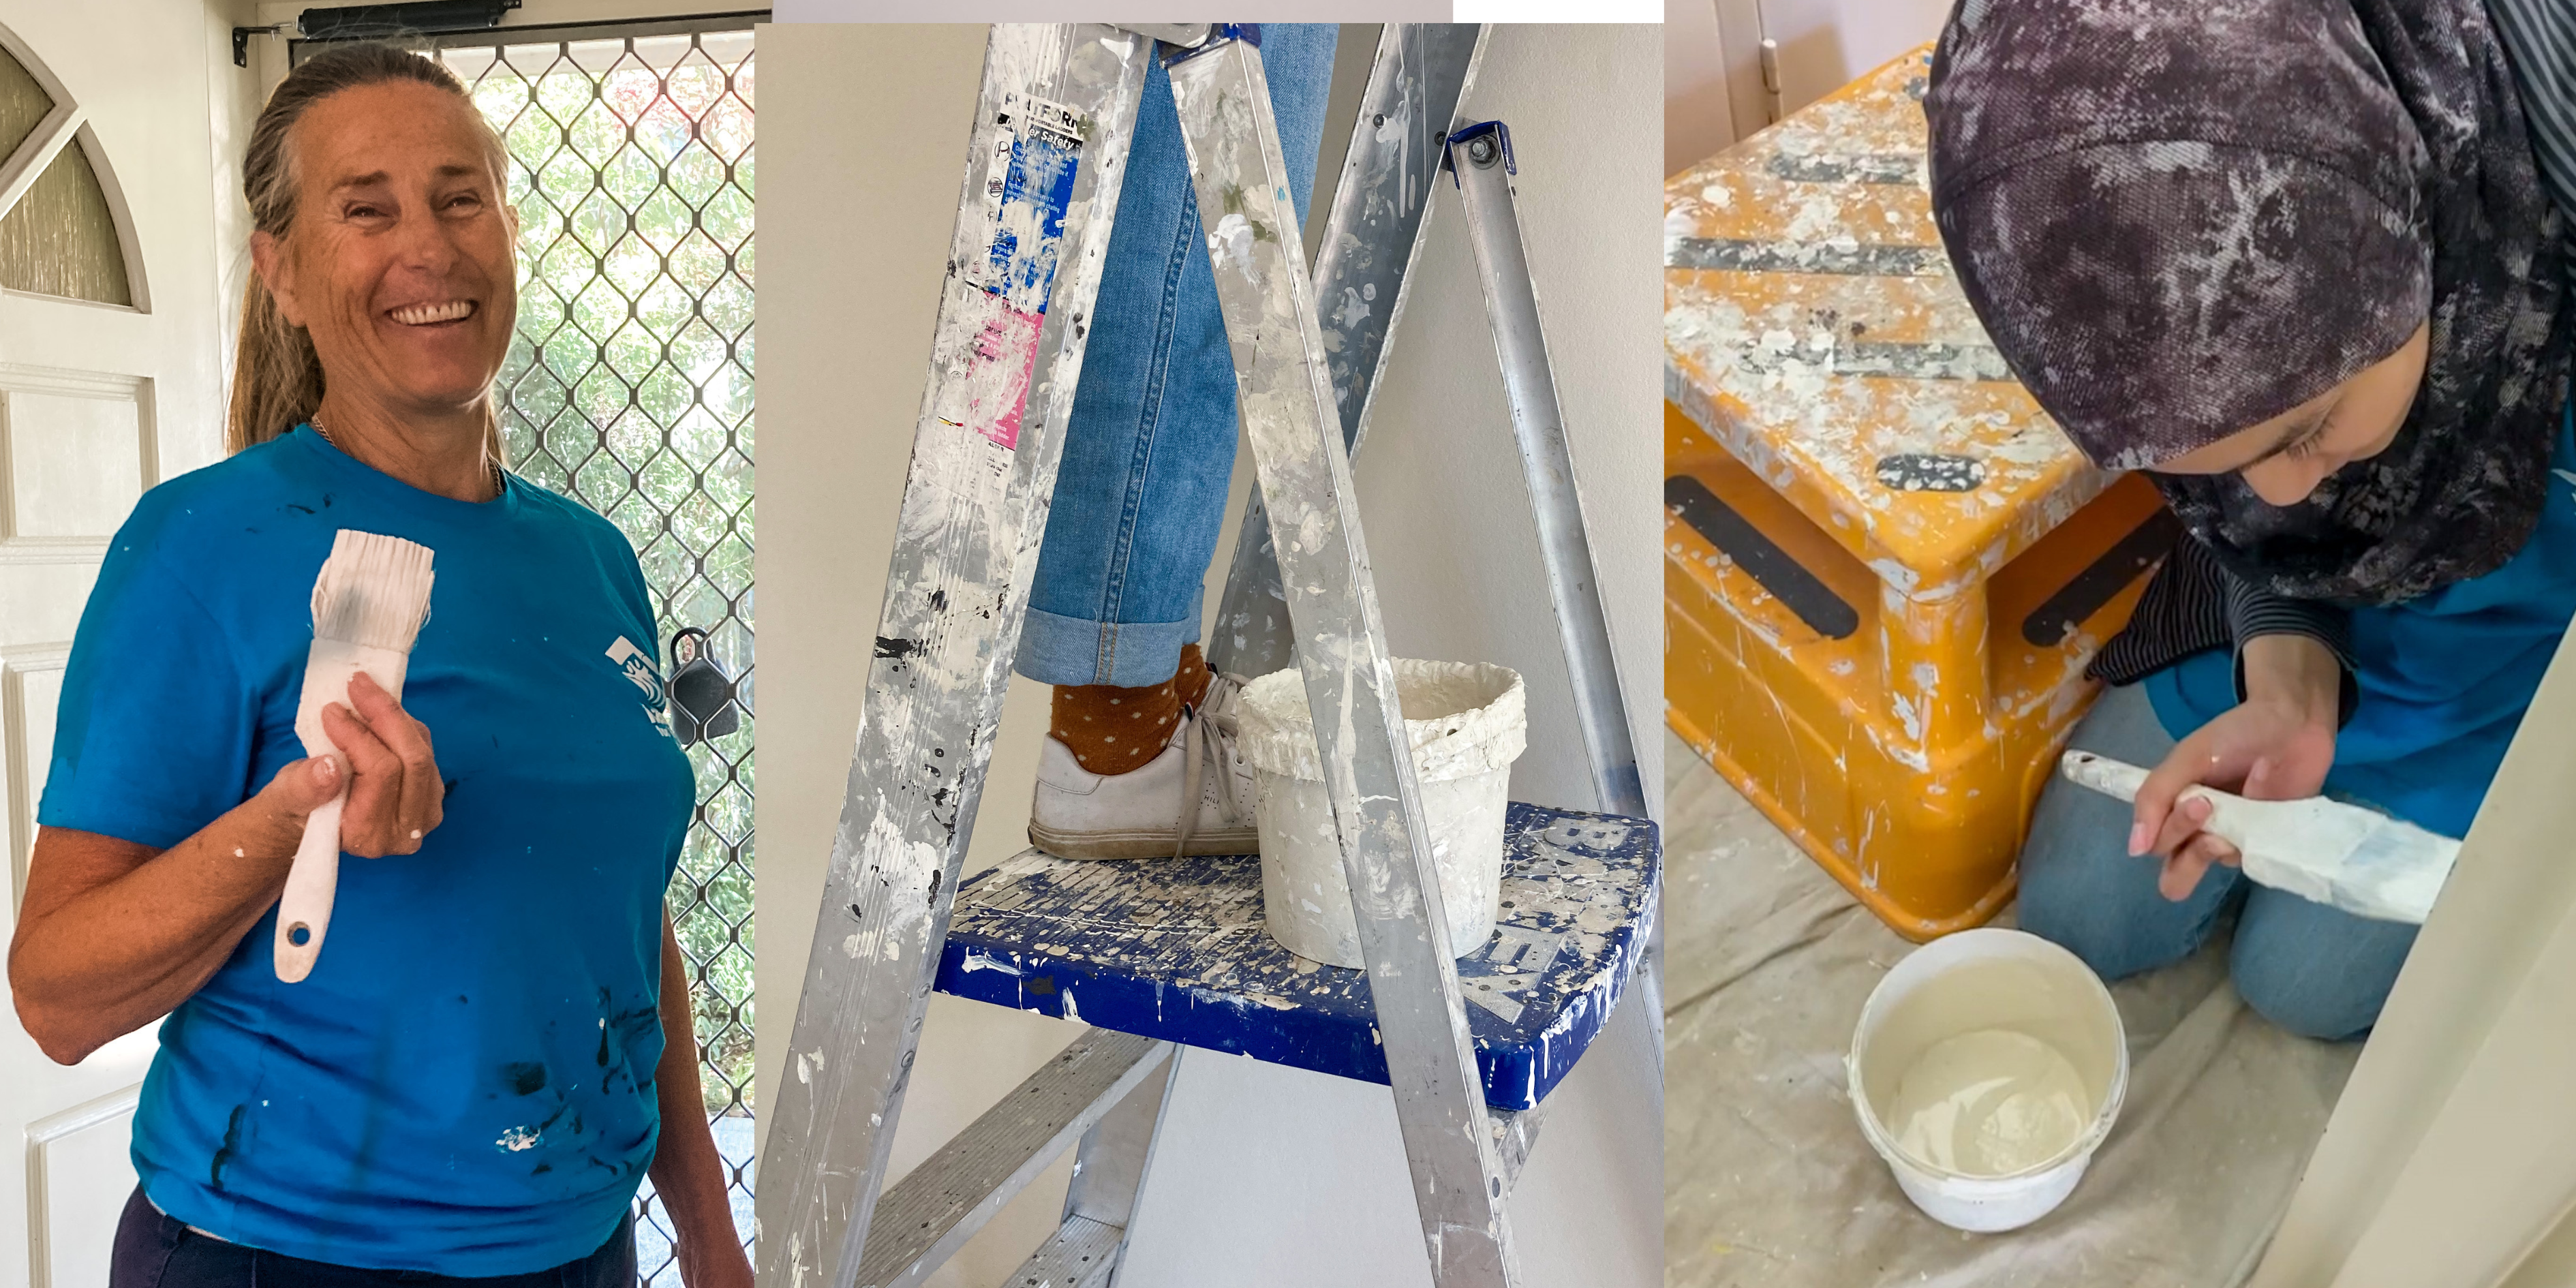 Three photographs. The first photo shows a lady in a blue Habitat t-shirt holding a paint brush and smiling. The second photo is of someone's shoes standing on a ladder. The third image is of a girl in a headscarf sitting on the floor and painting a wall.